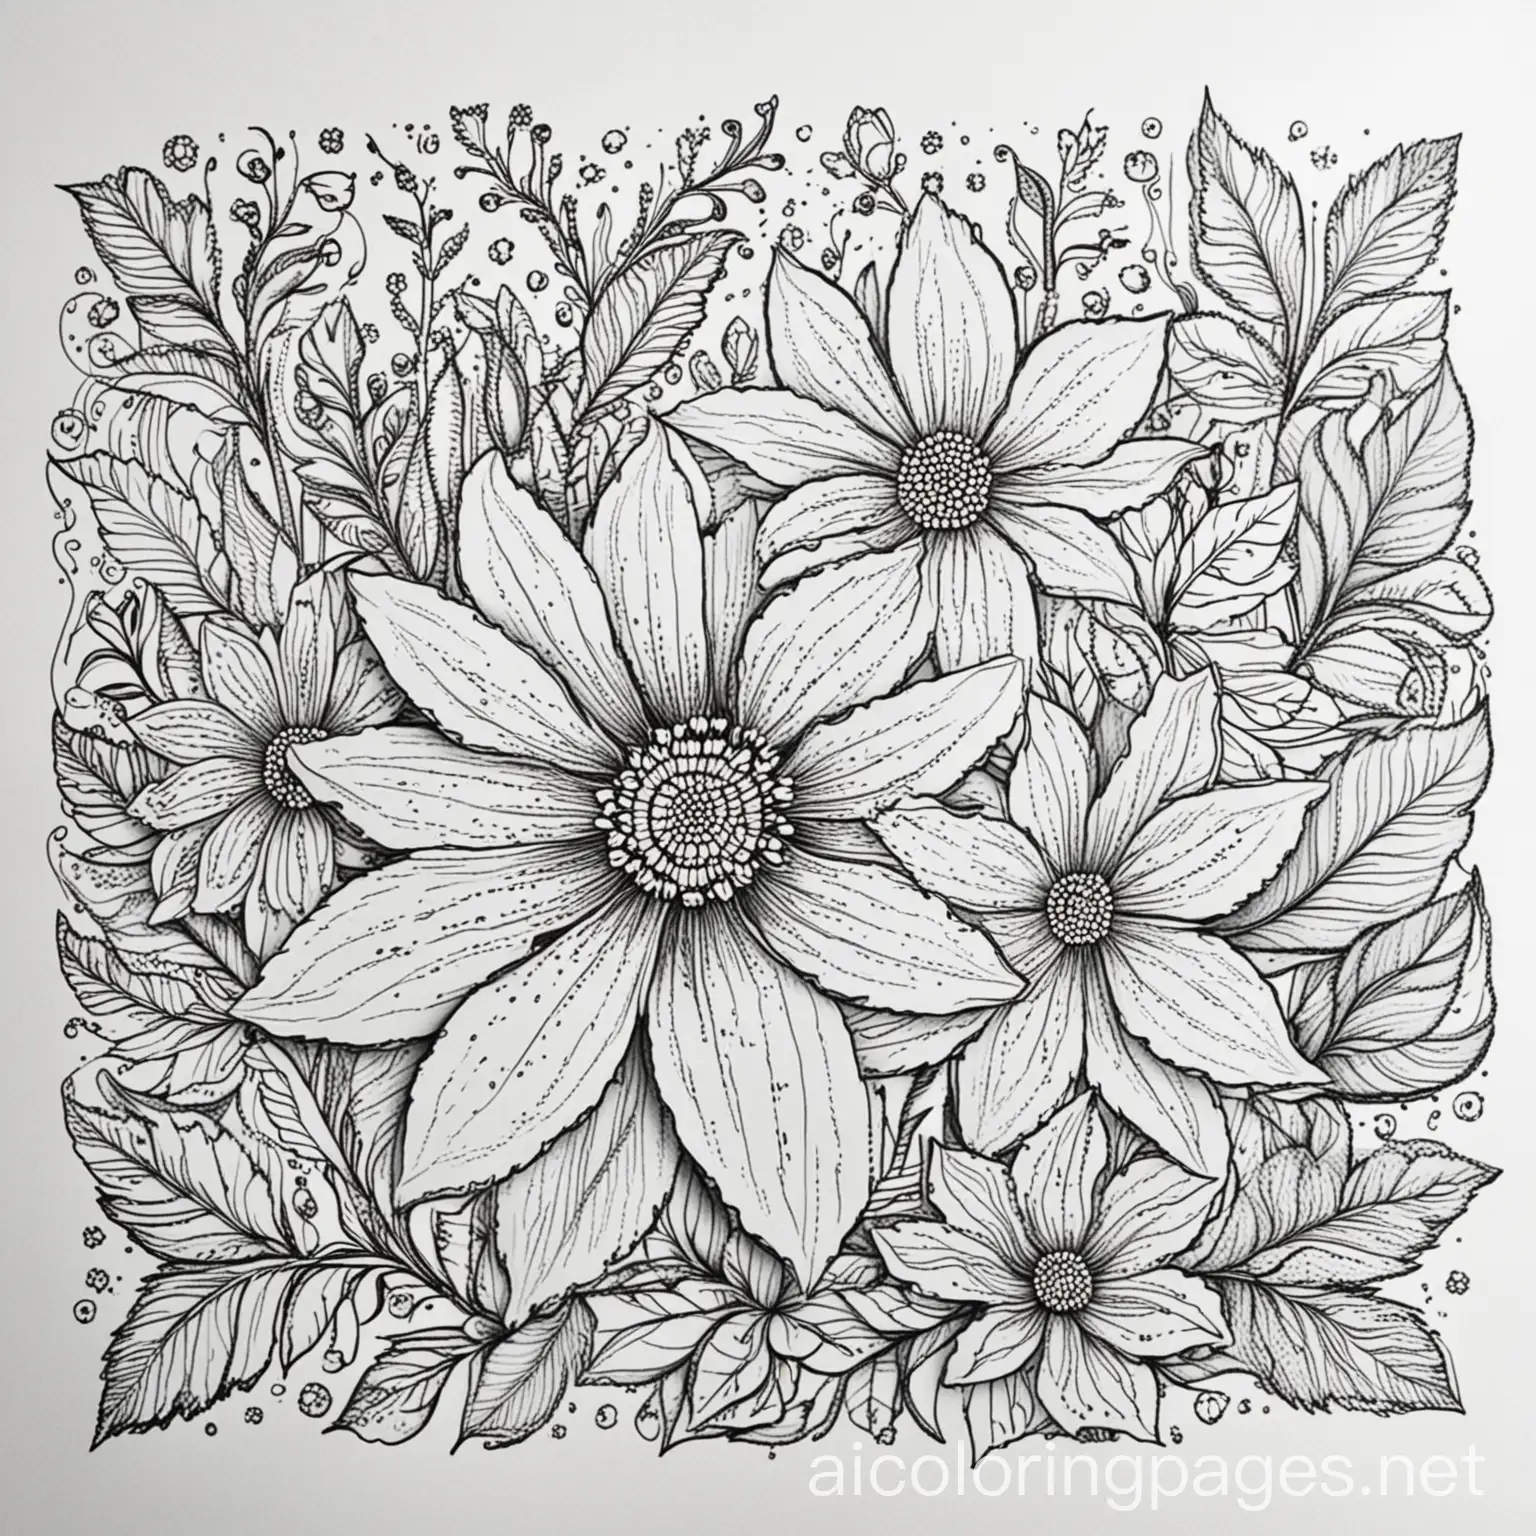 flower coloring pages for adults, Coloring Page, black and white, line art, white background, Simplicity, Ample White Space. The background of the coloring page is plain white to make it easy for young children to color within the lines. The outlines of all the subjects are easy to distinguish, making it simple for kids to color without too much difficulty